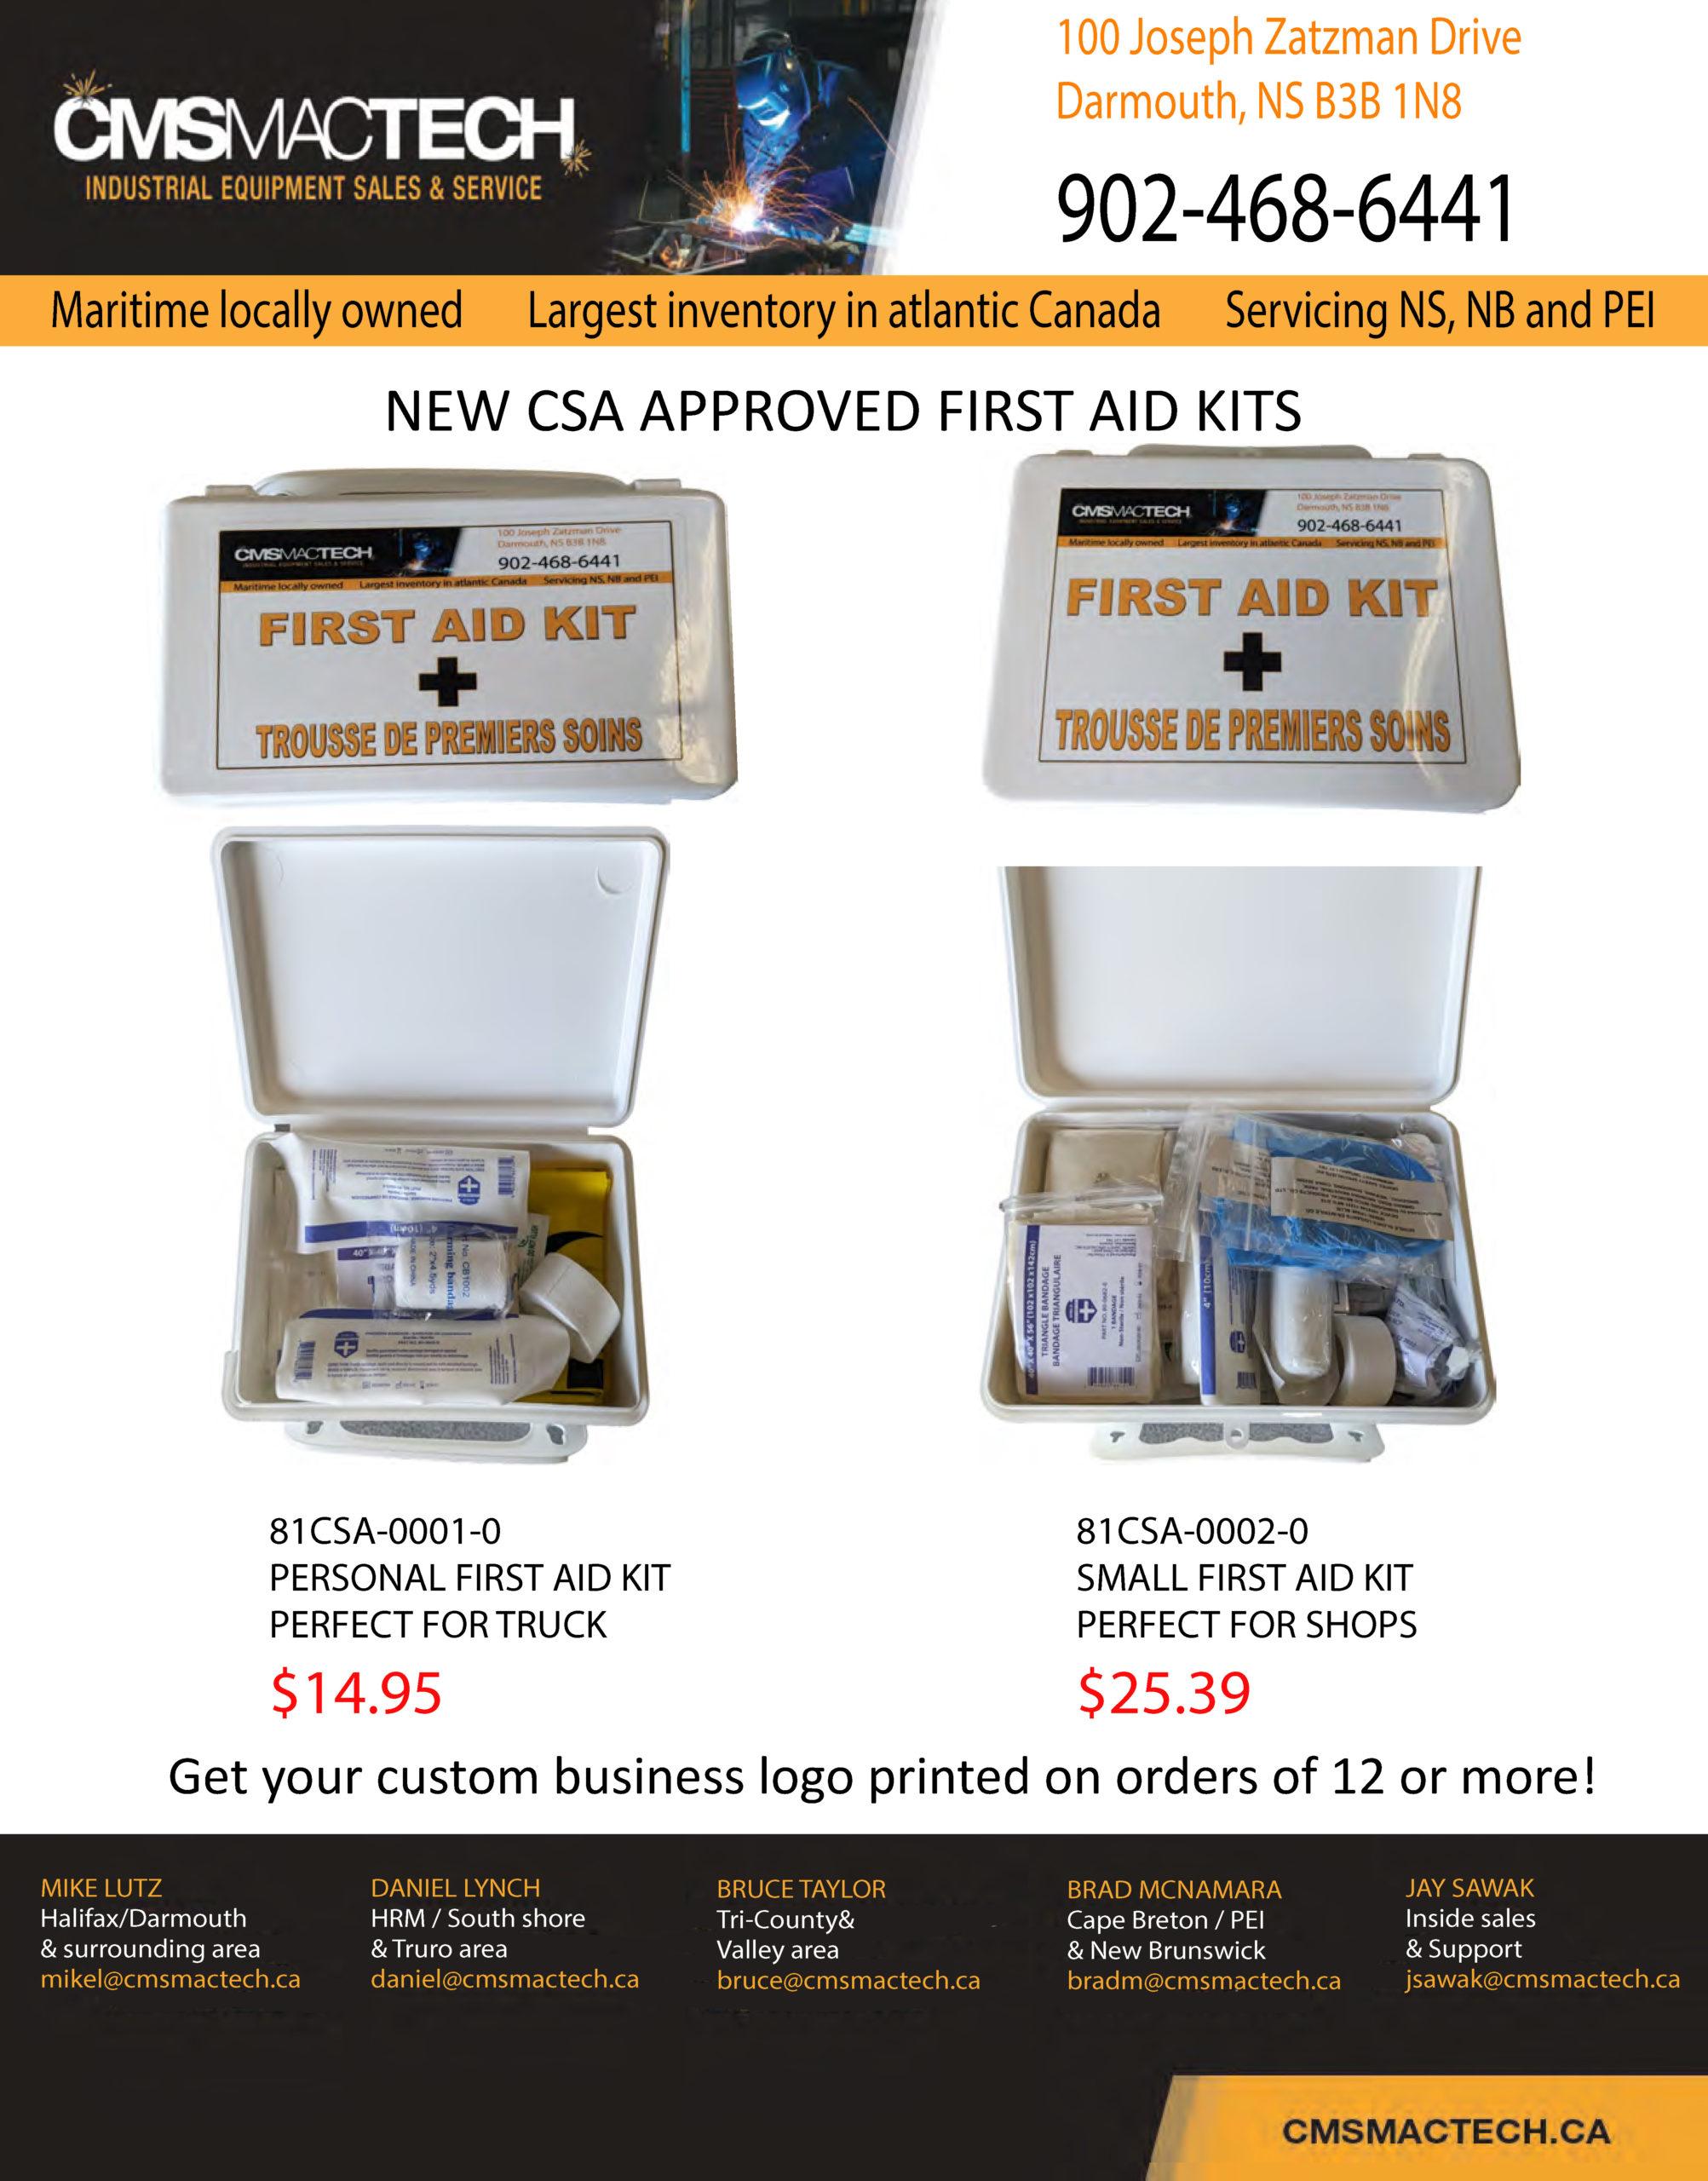 New CSA Approved first aid kits